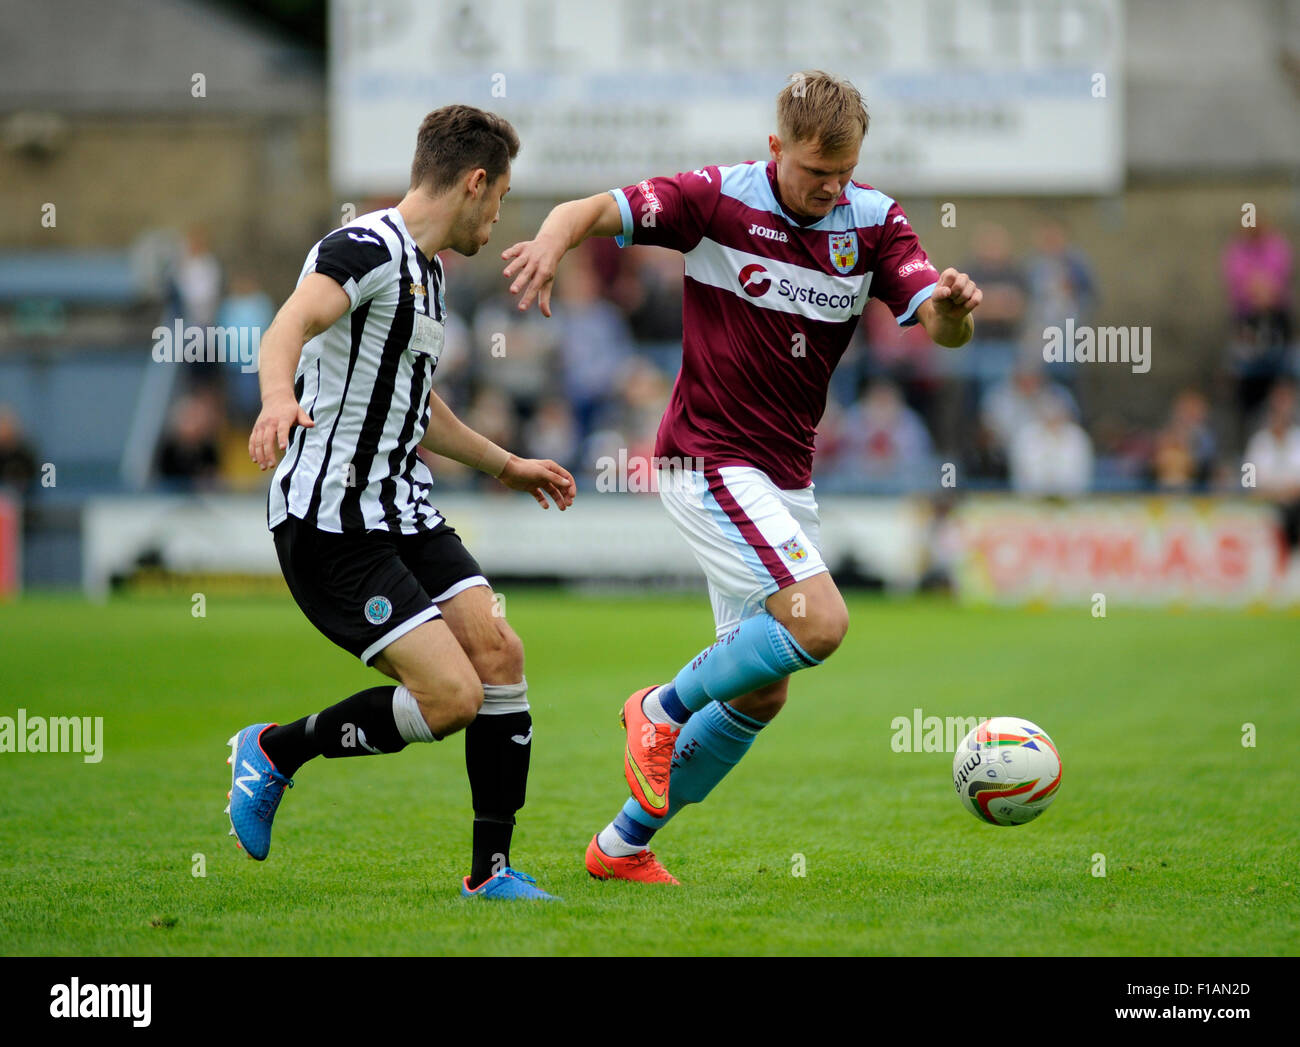 Dorchester, England. 31st August 2015. Mark Cooper (right) takes on Dorchester's Oakley Hanger (Left) during the Southern Premier League derby game between Dorchester Town FC v  Weymouth FC at The Greene King Stadium. Dorchester won the game 1-0. Credit:  David Partridge / Alamy Live News Stock Photo